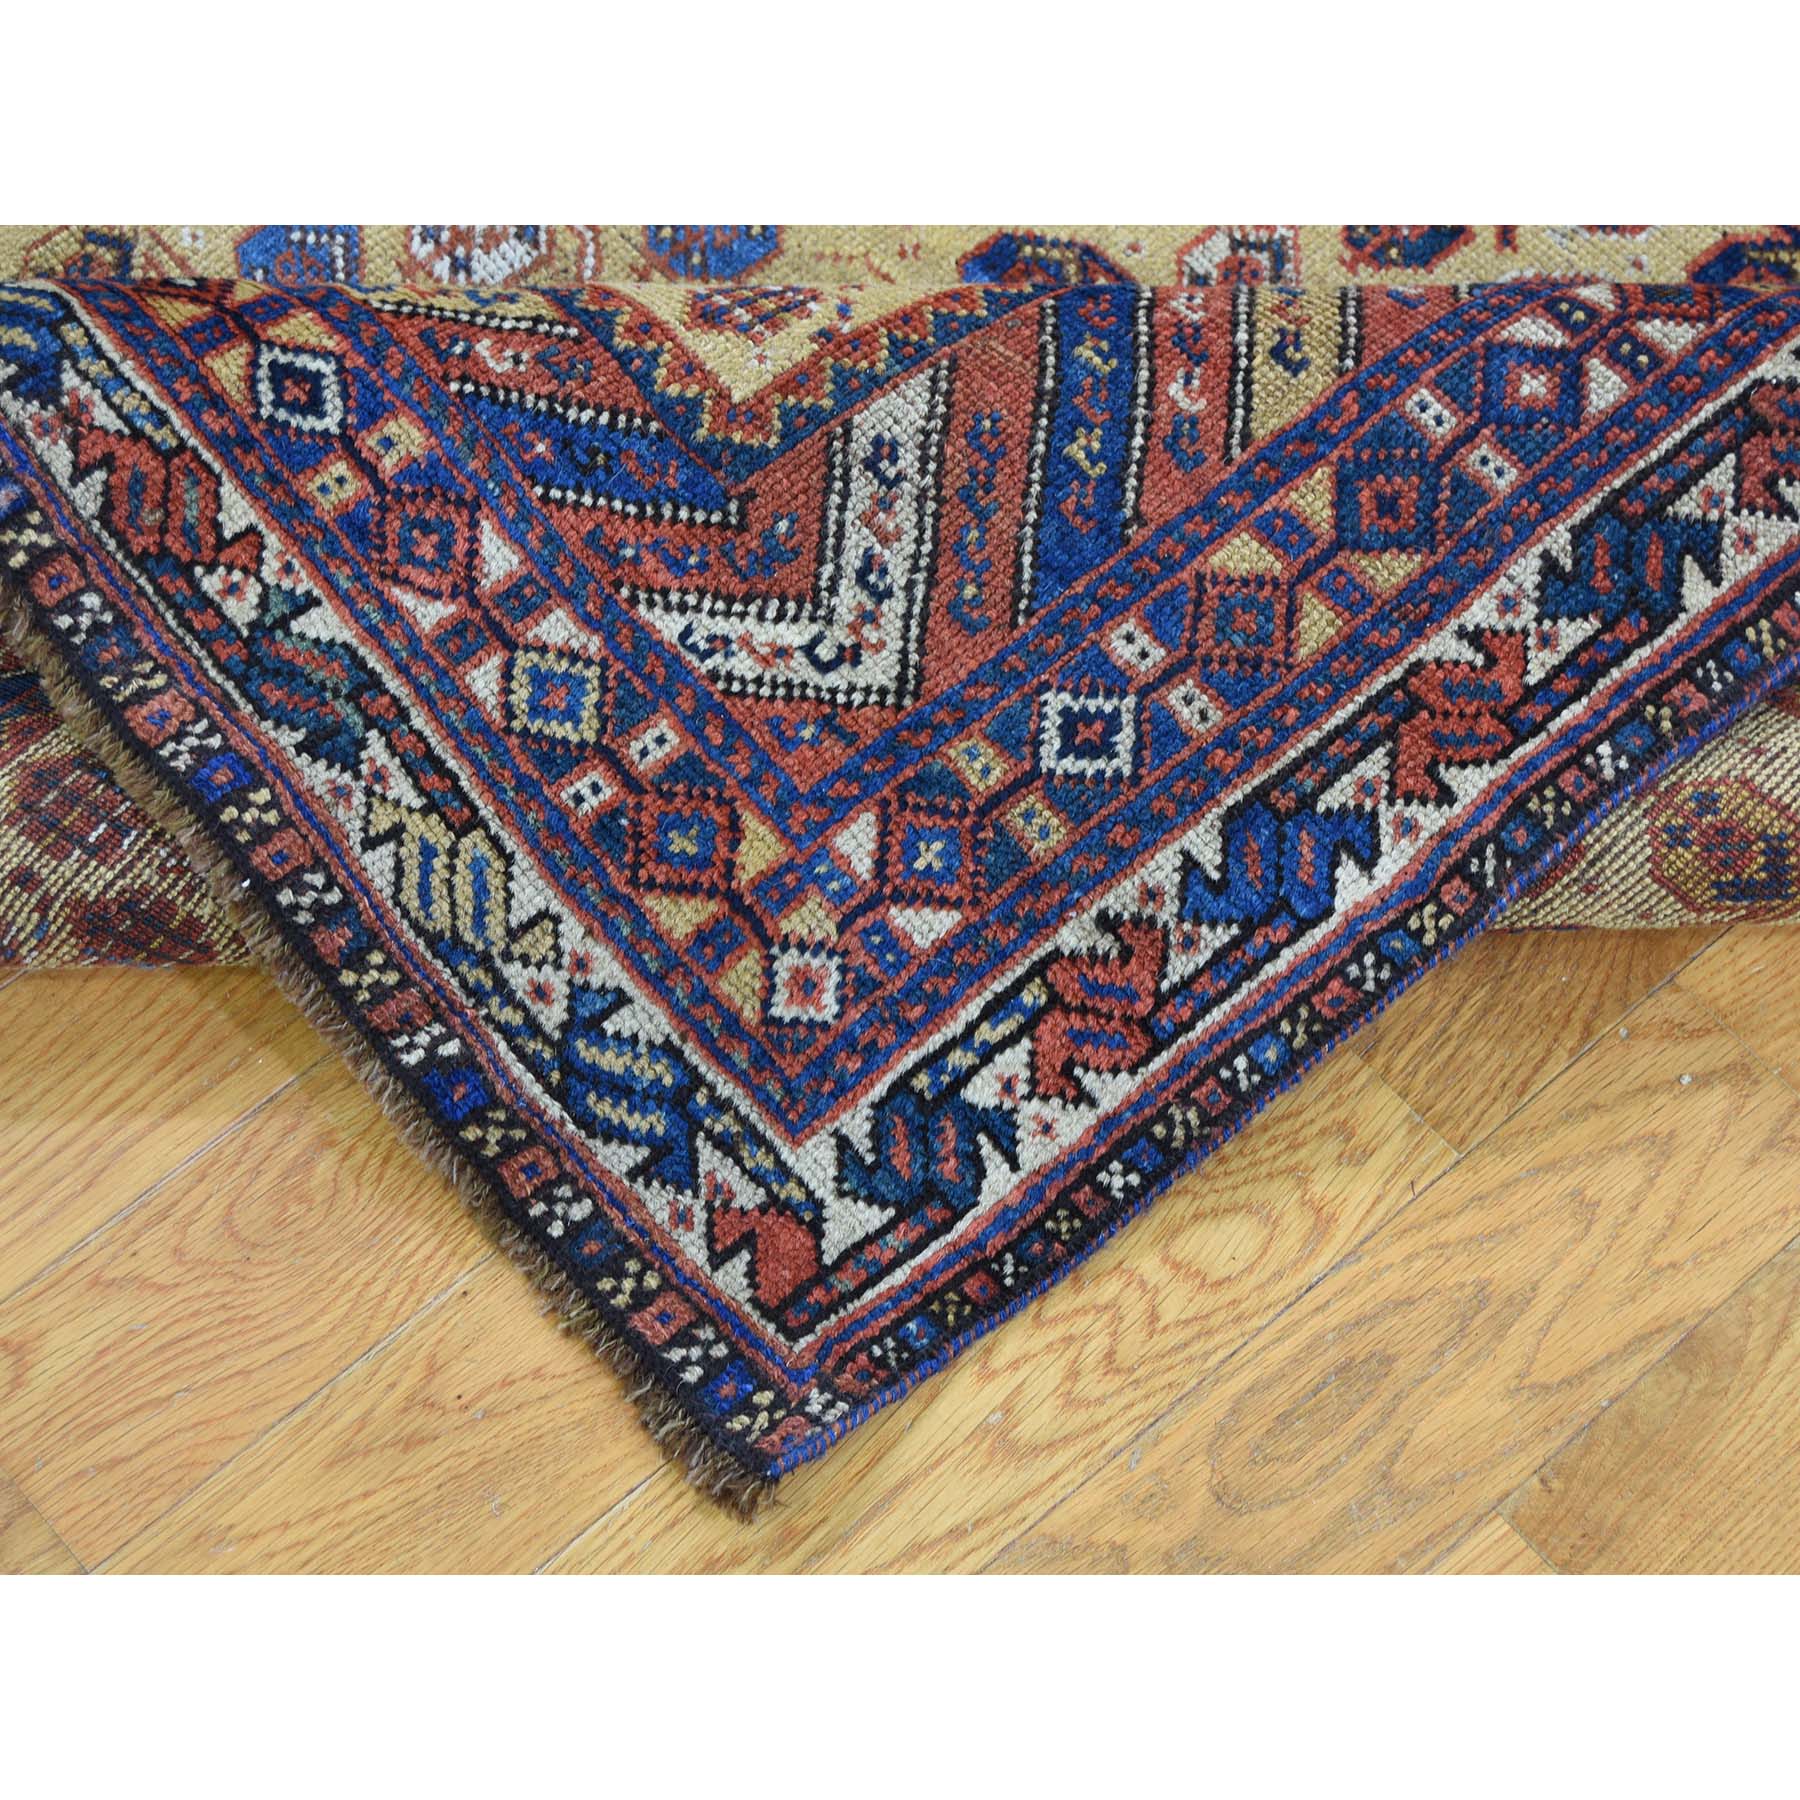 5-9 x7-10  Antique Persian Afshar Even Wear Good Condition Hand-Knotted Oriental Rug 